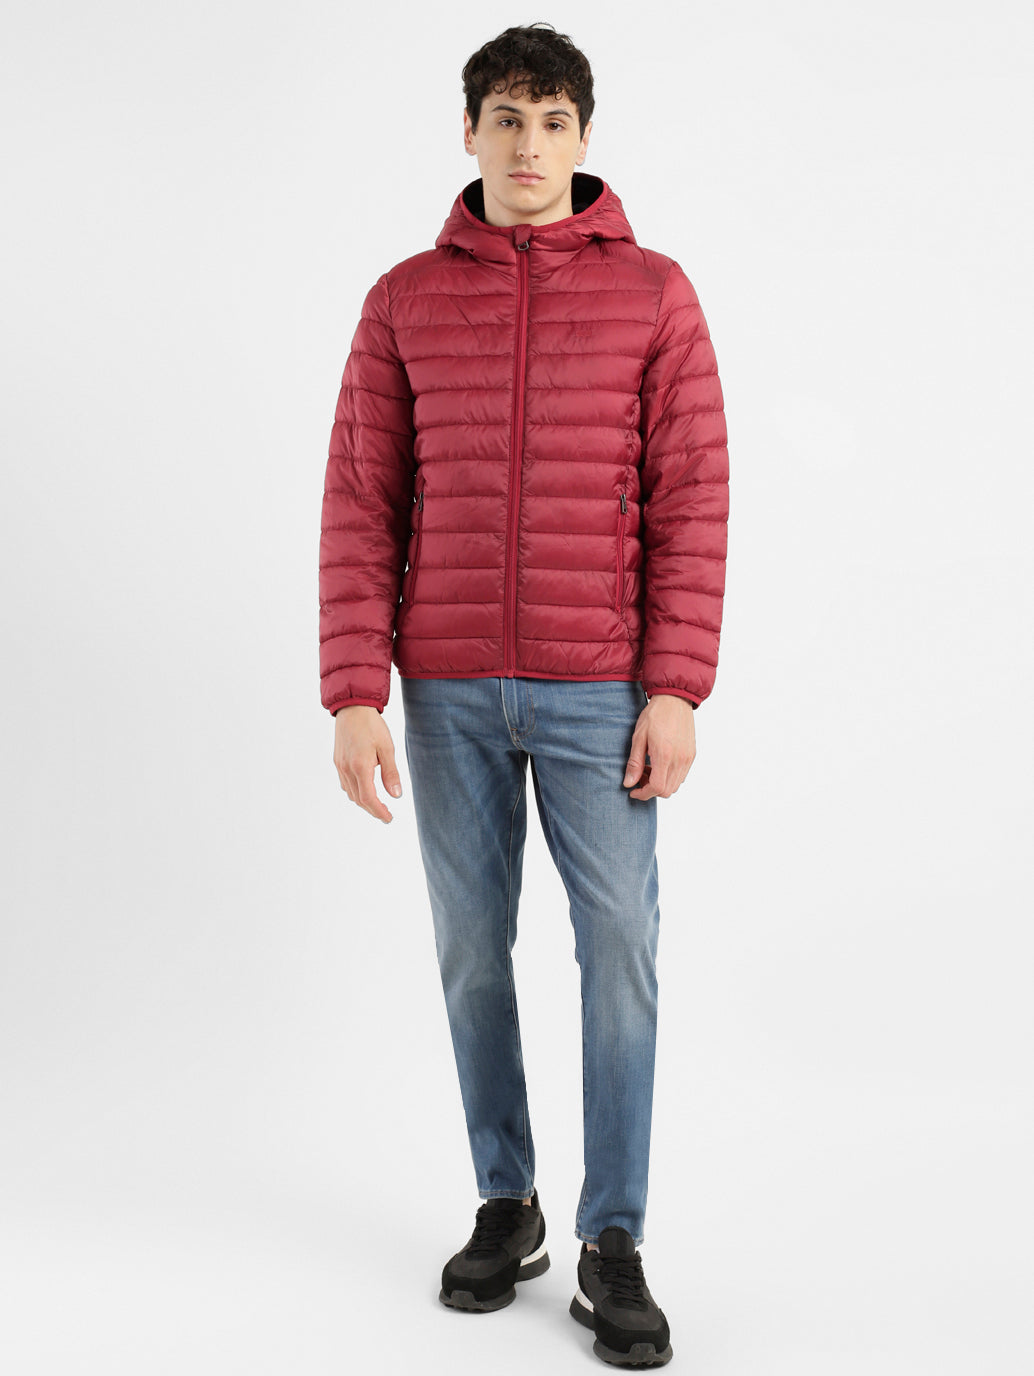 Men's Solid Red Hooded Jacket